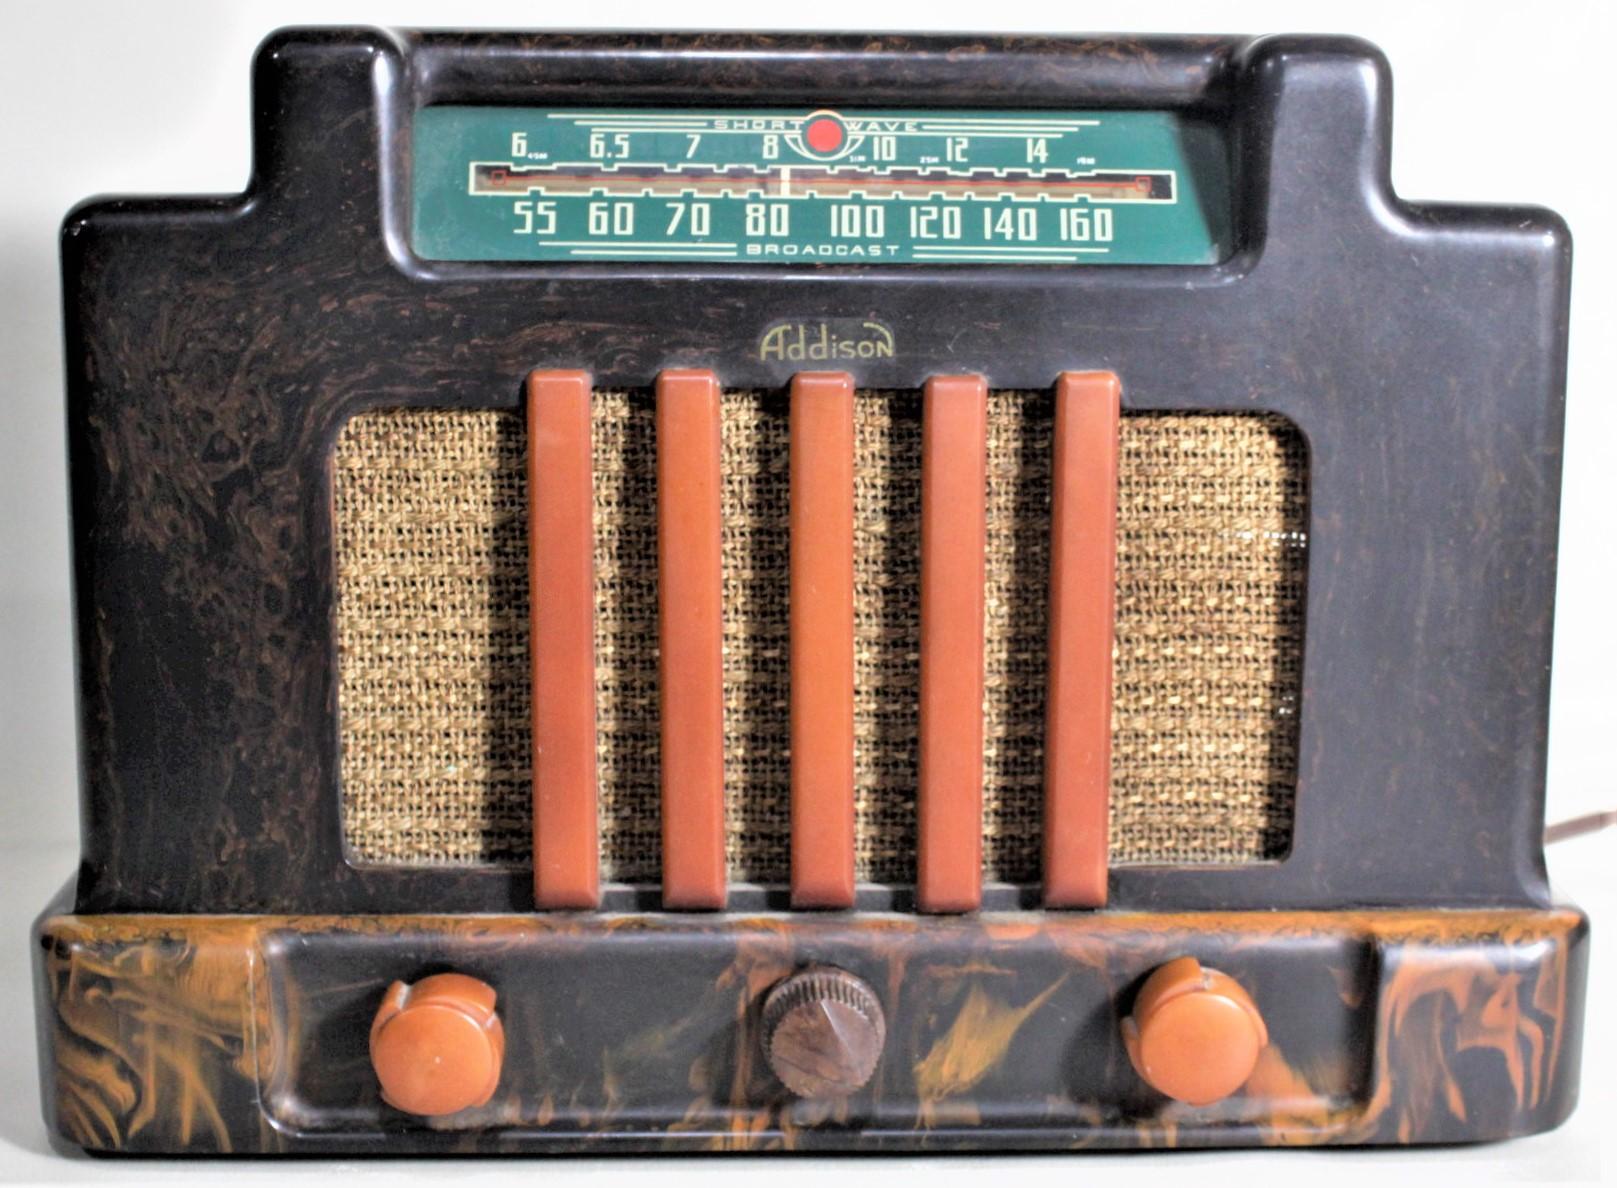 This Art Deco styled vintage tube radio was made by the Addison Industries Ltd. of Canada in circa 1939. This is Addison's Model 5D, otherwise known as the 'Courthouse